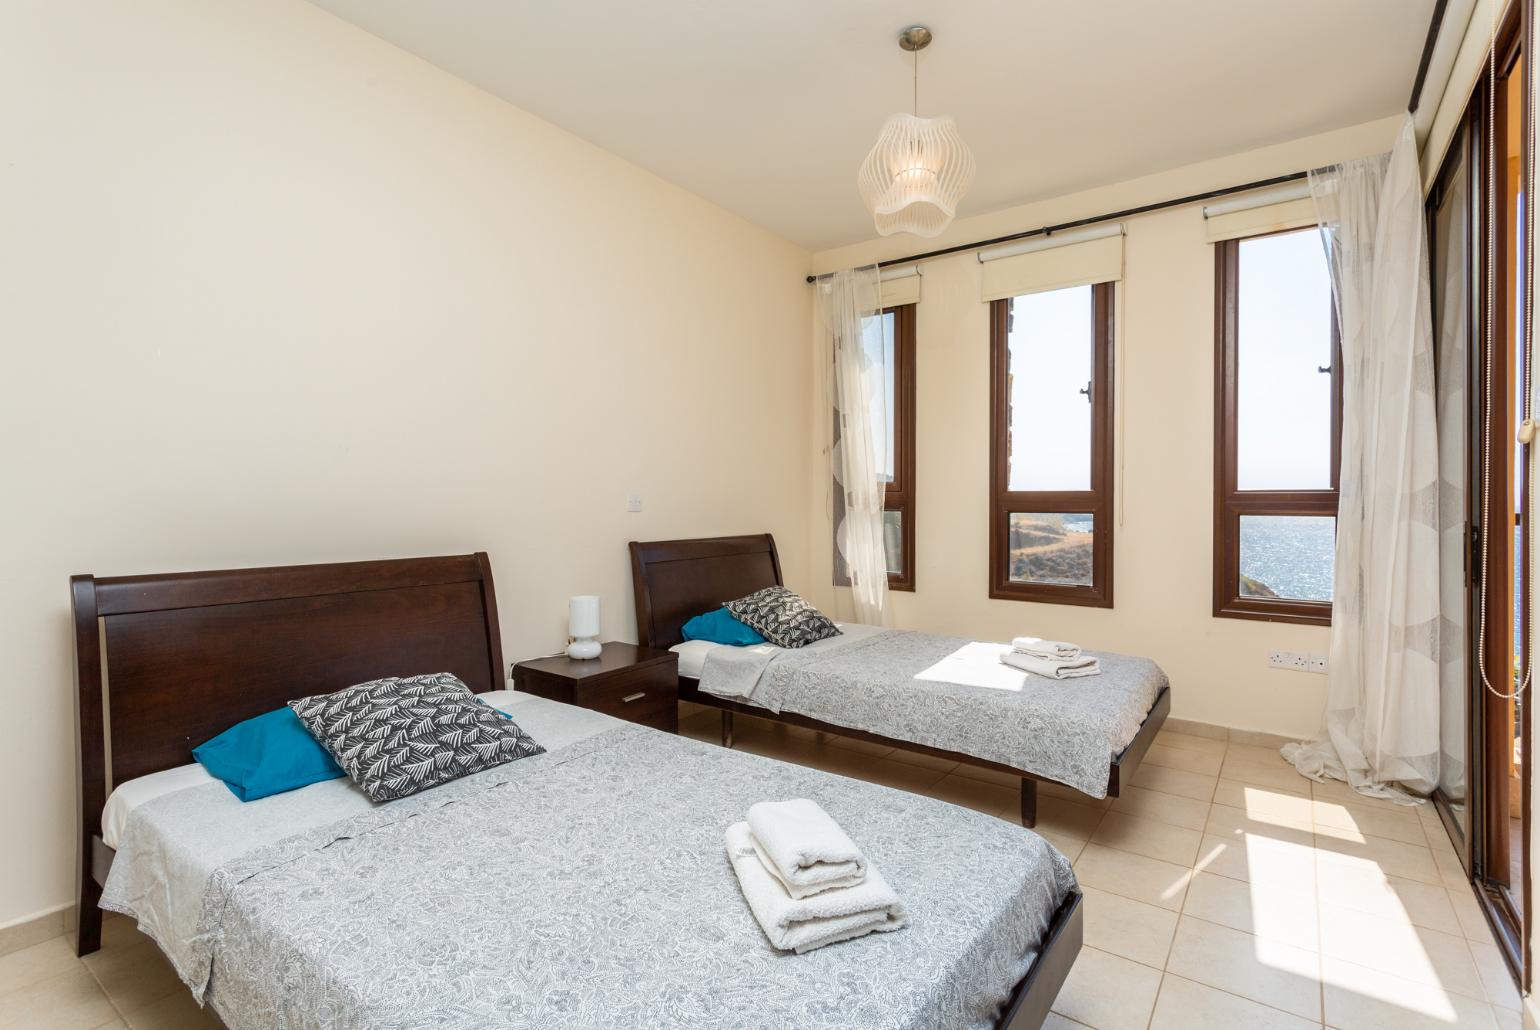 Twin bedroom with A/C and terrace access with sea views